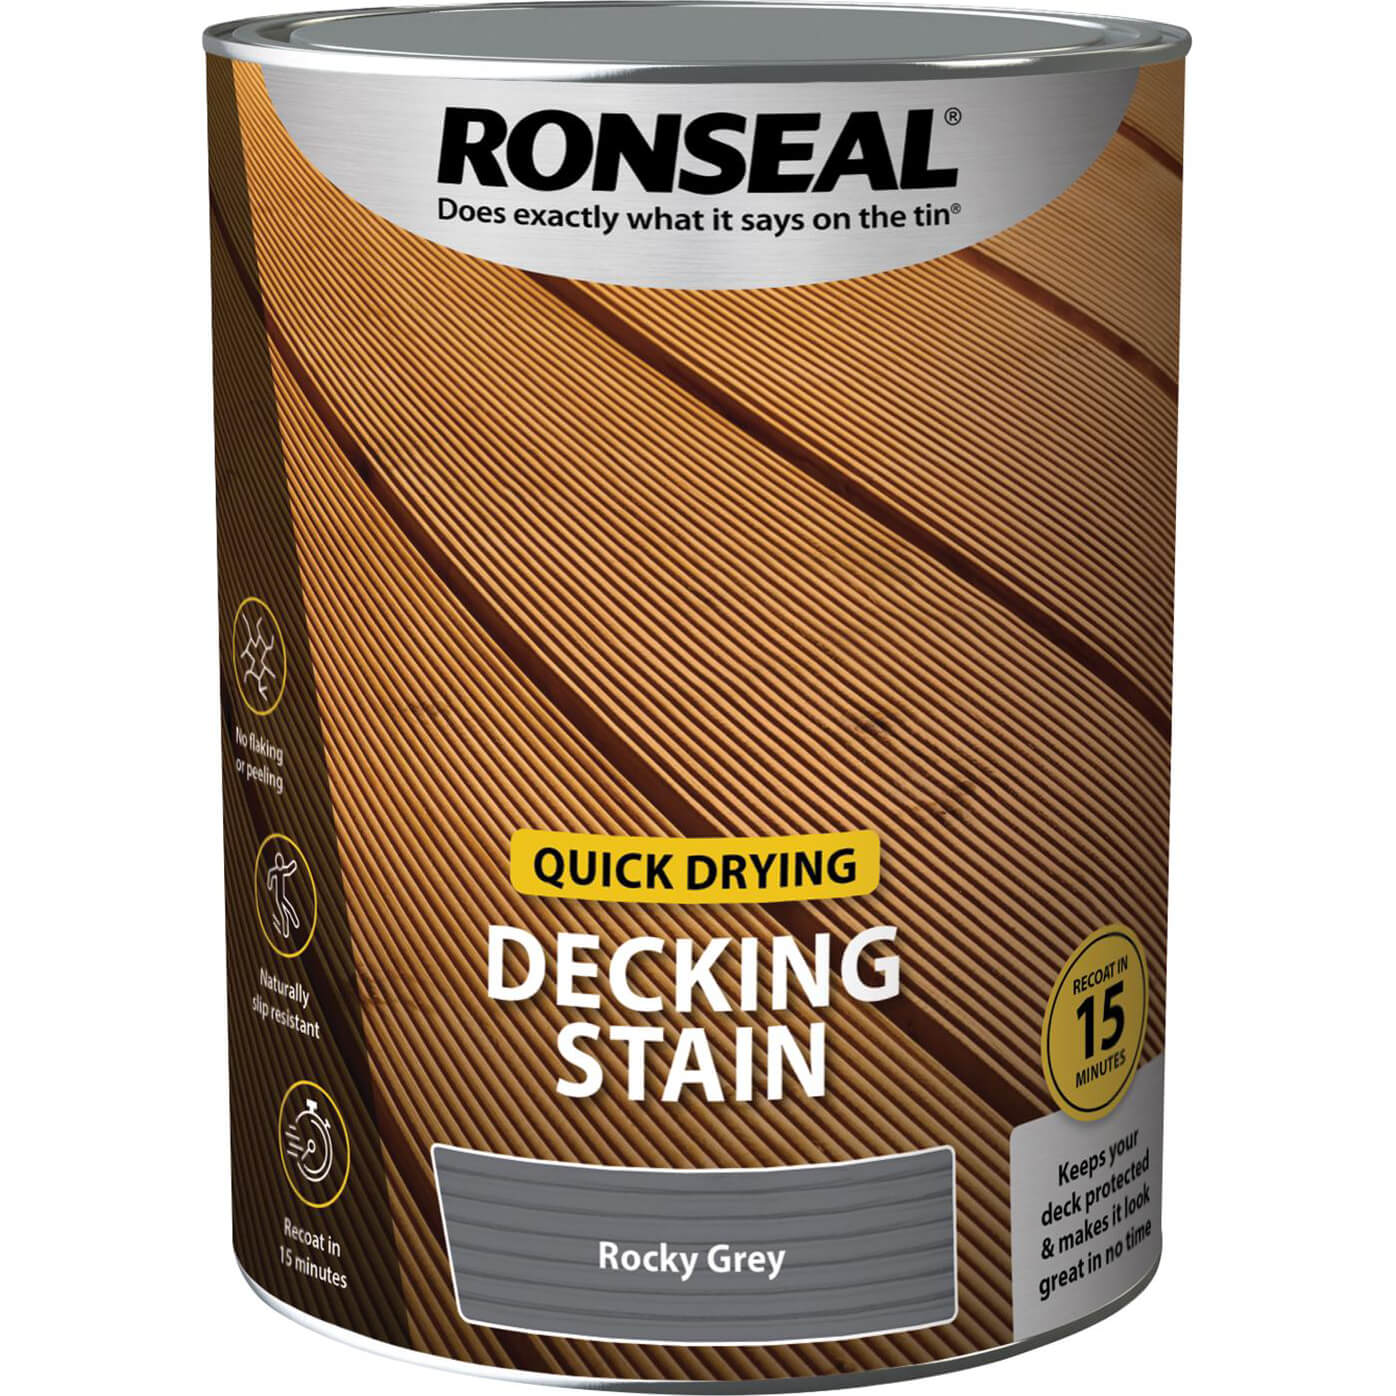 Ronseal Quick Drying Decking Stain 5l Rocky Grey